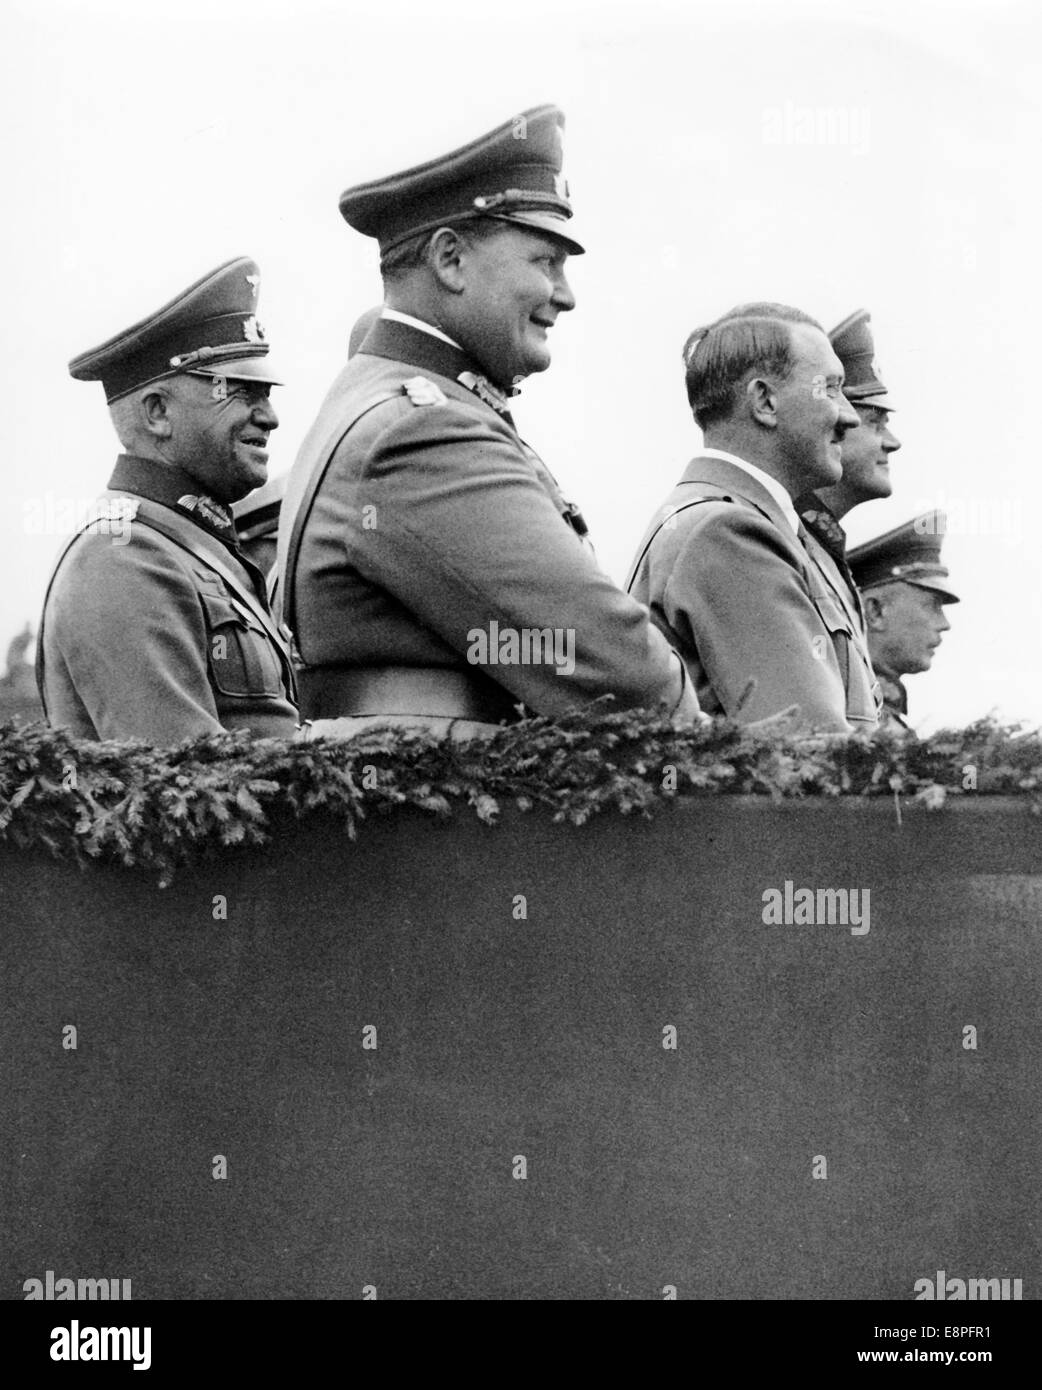 Nuremberg Rally 1934 in Nuremberg, Germany - Hermann Goering (Front L-R), Adolf Hitler, Werner von Blomberg (Reich Minister of War) and Werner von Fritsch (member of the German High Command) in front of the grandstand during a display by the Wehrmacht (armed forces) at Zeppelin Field at the Nazi party rally grounds. (Flaws in quality due to the historic picture copy) Fotoarchiv für Zeitgeschichtee - NO WIRE SERVICE - Stock Photo